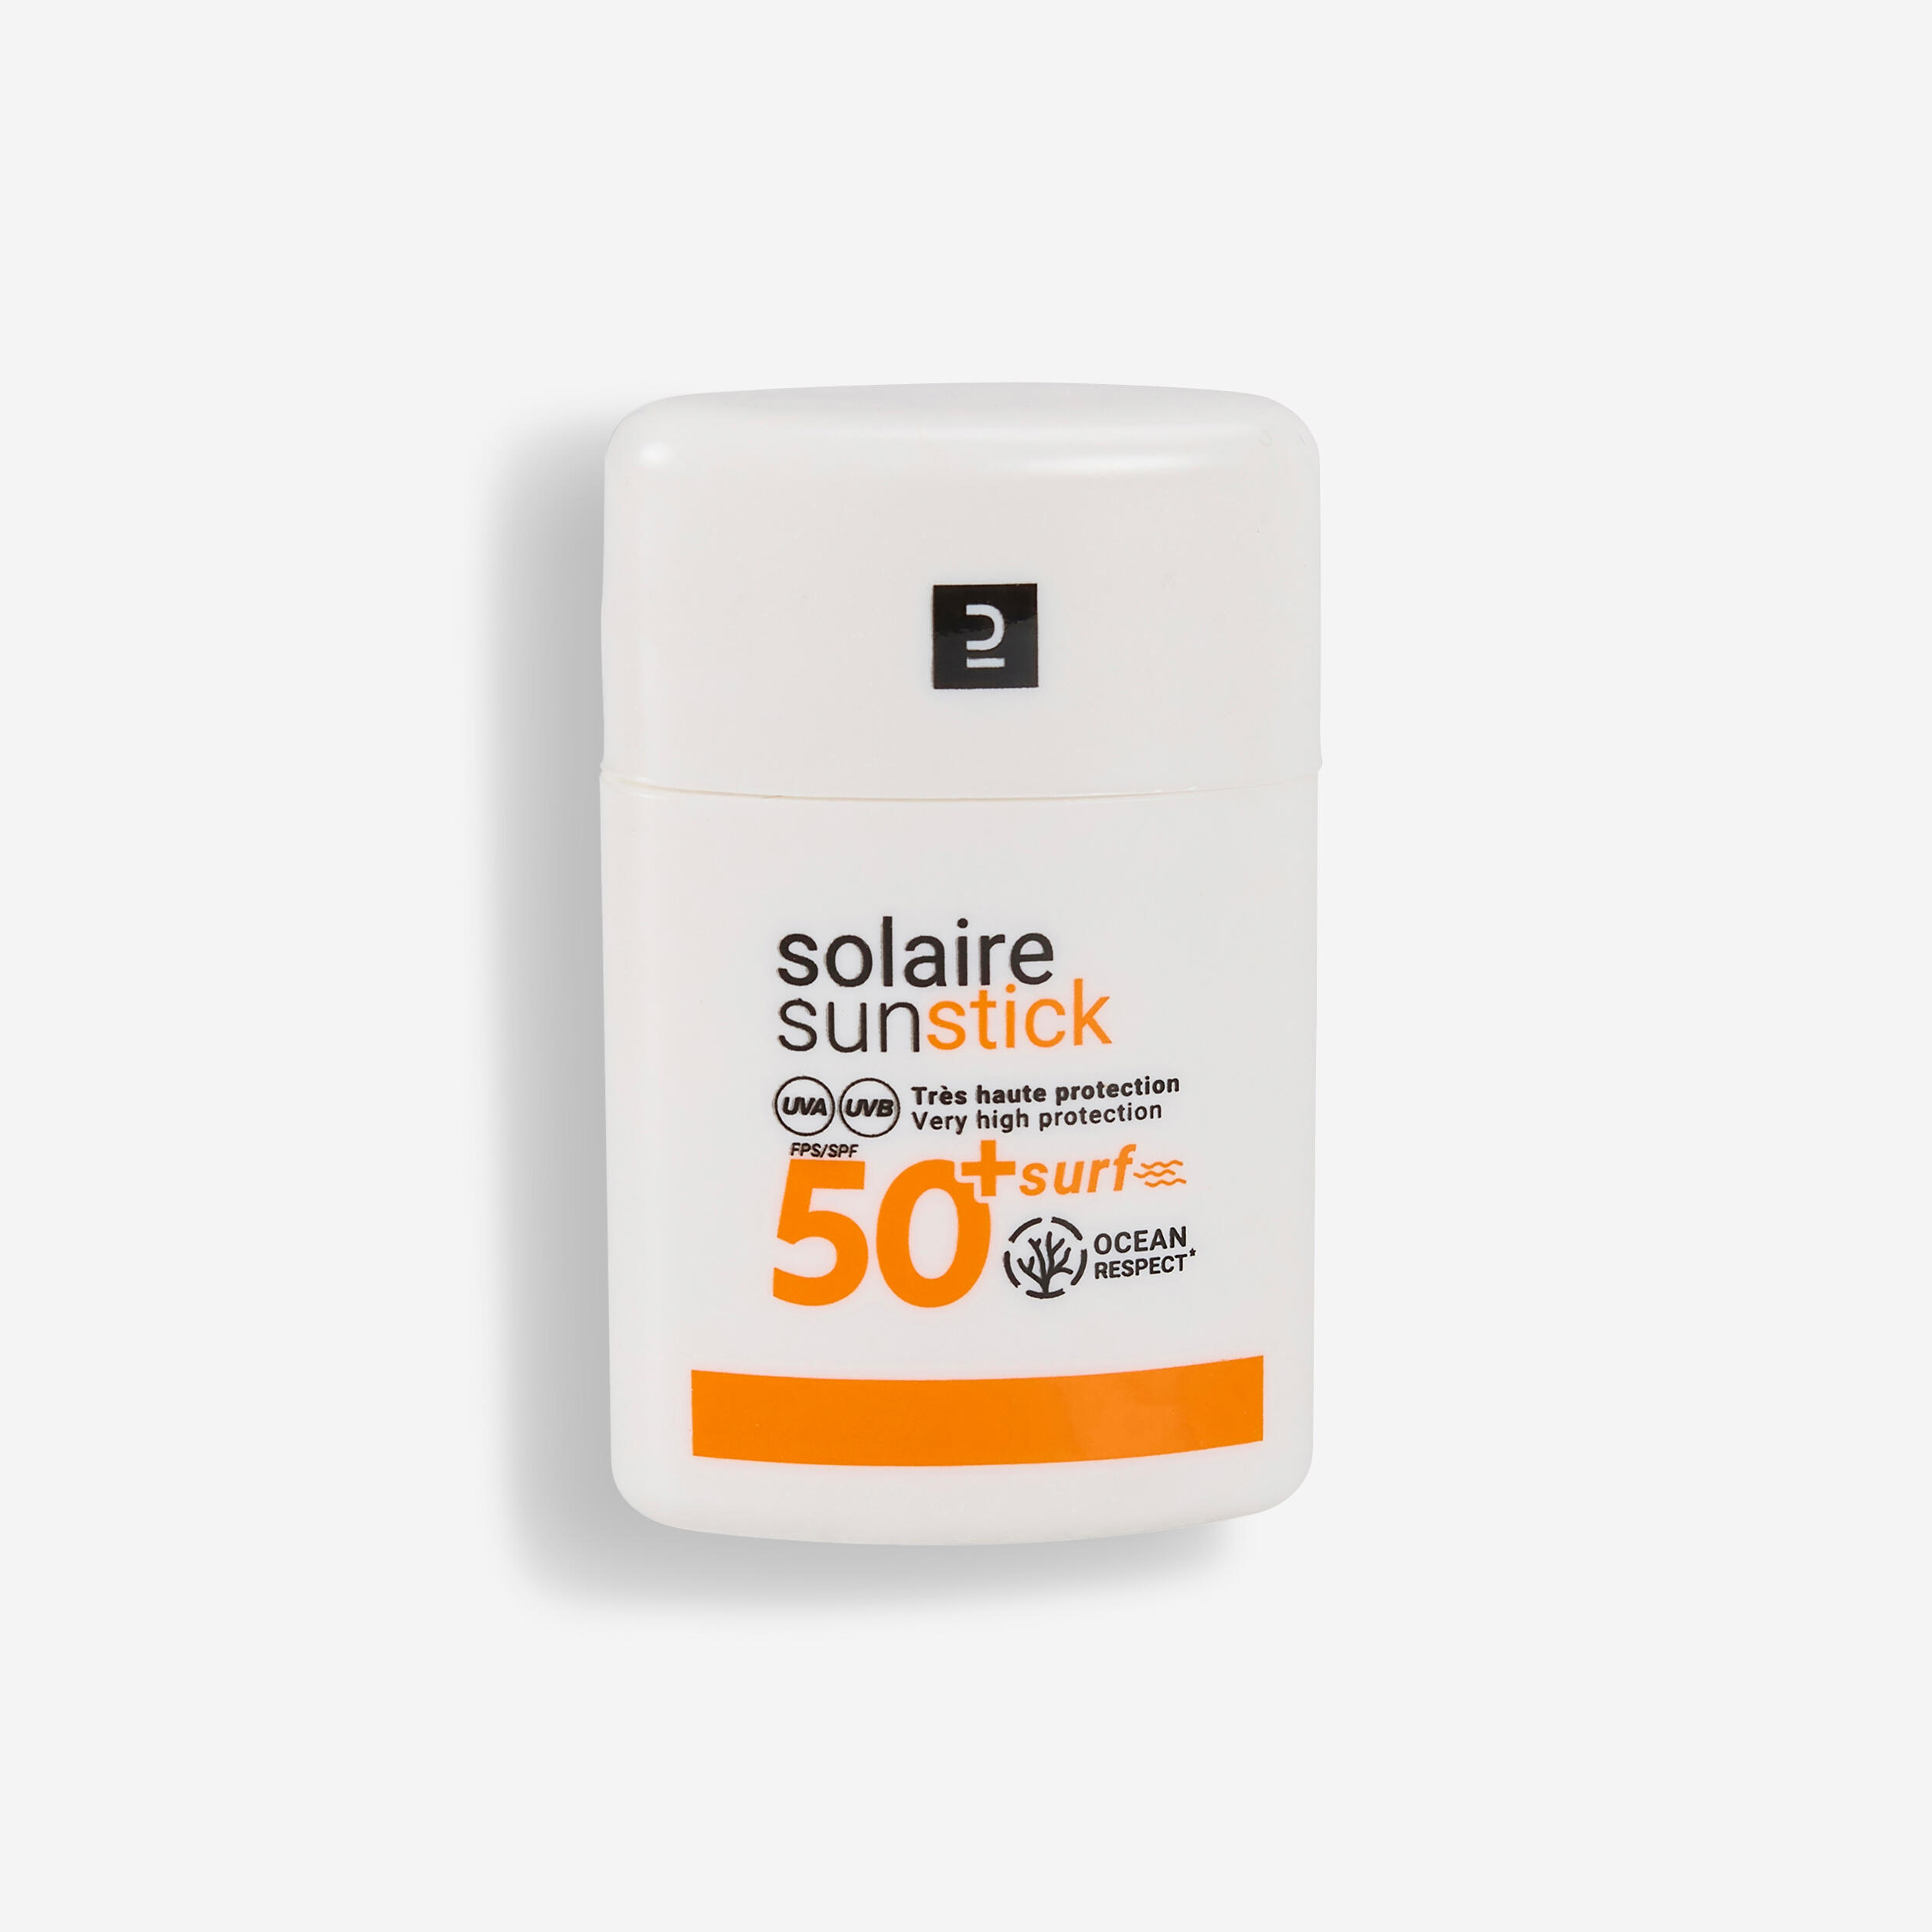 OLAIAN Natural, mineral sunscreen STICK for the face SPF50+ WHITE.